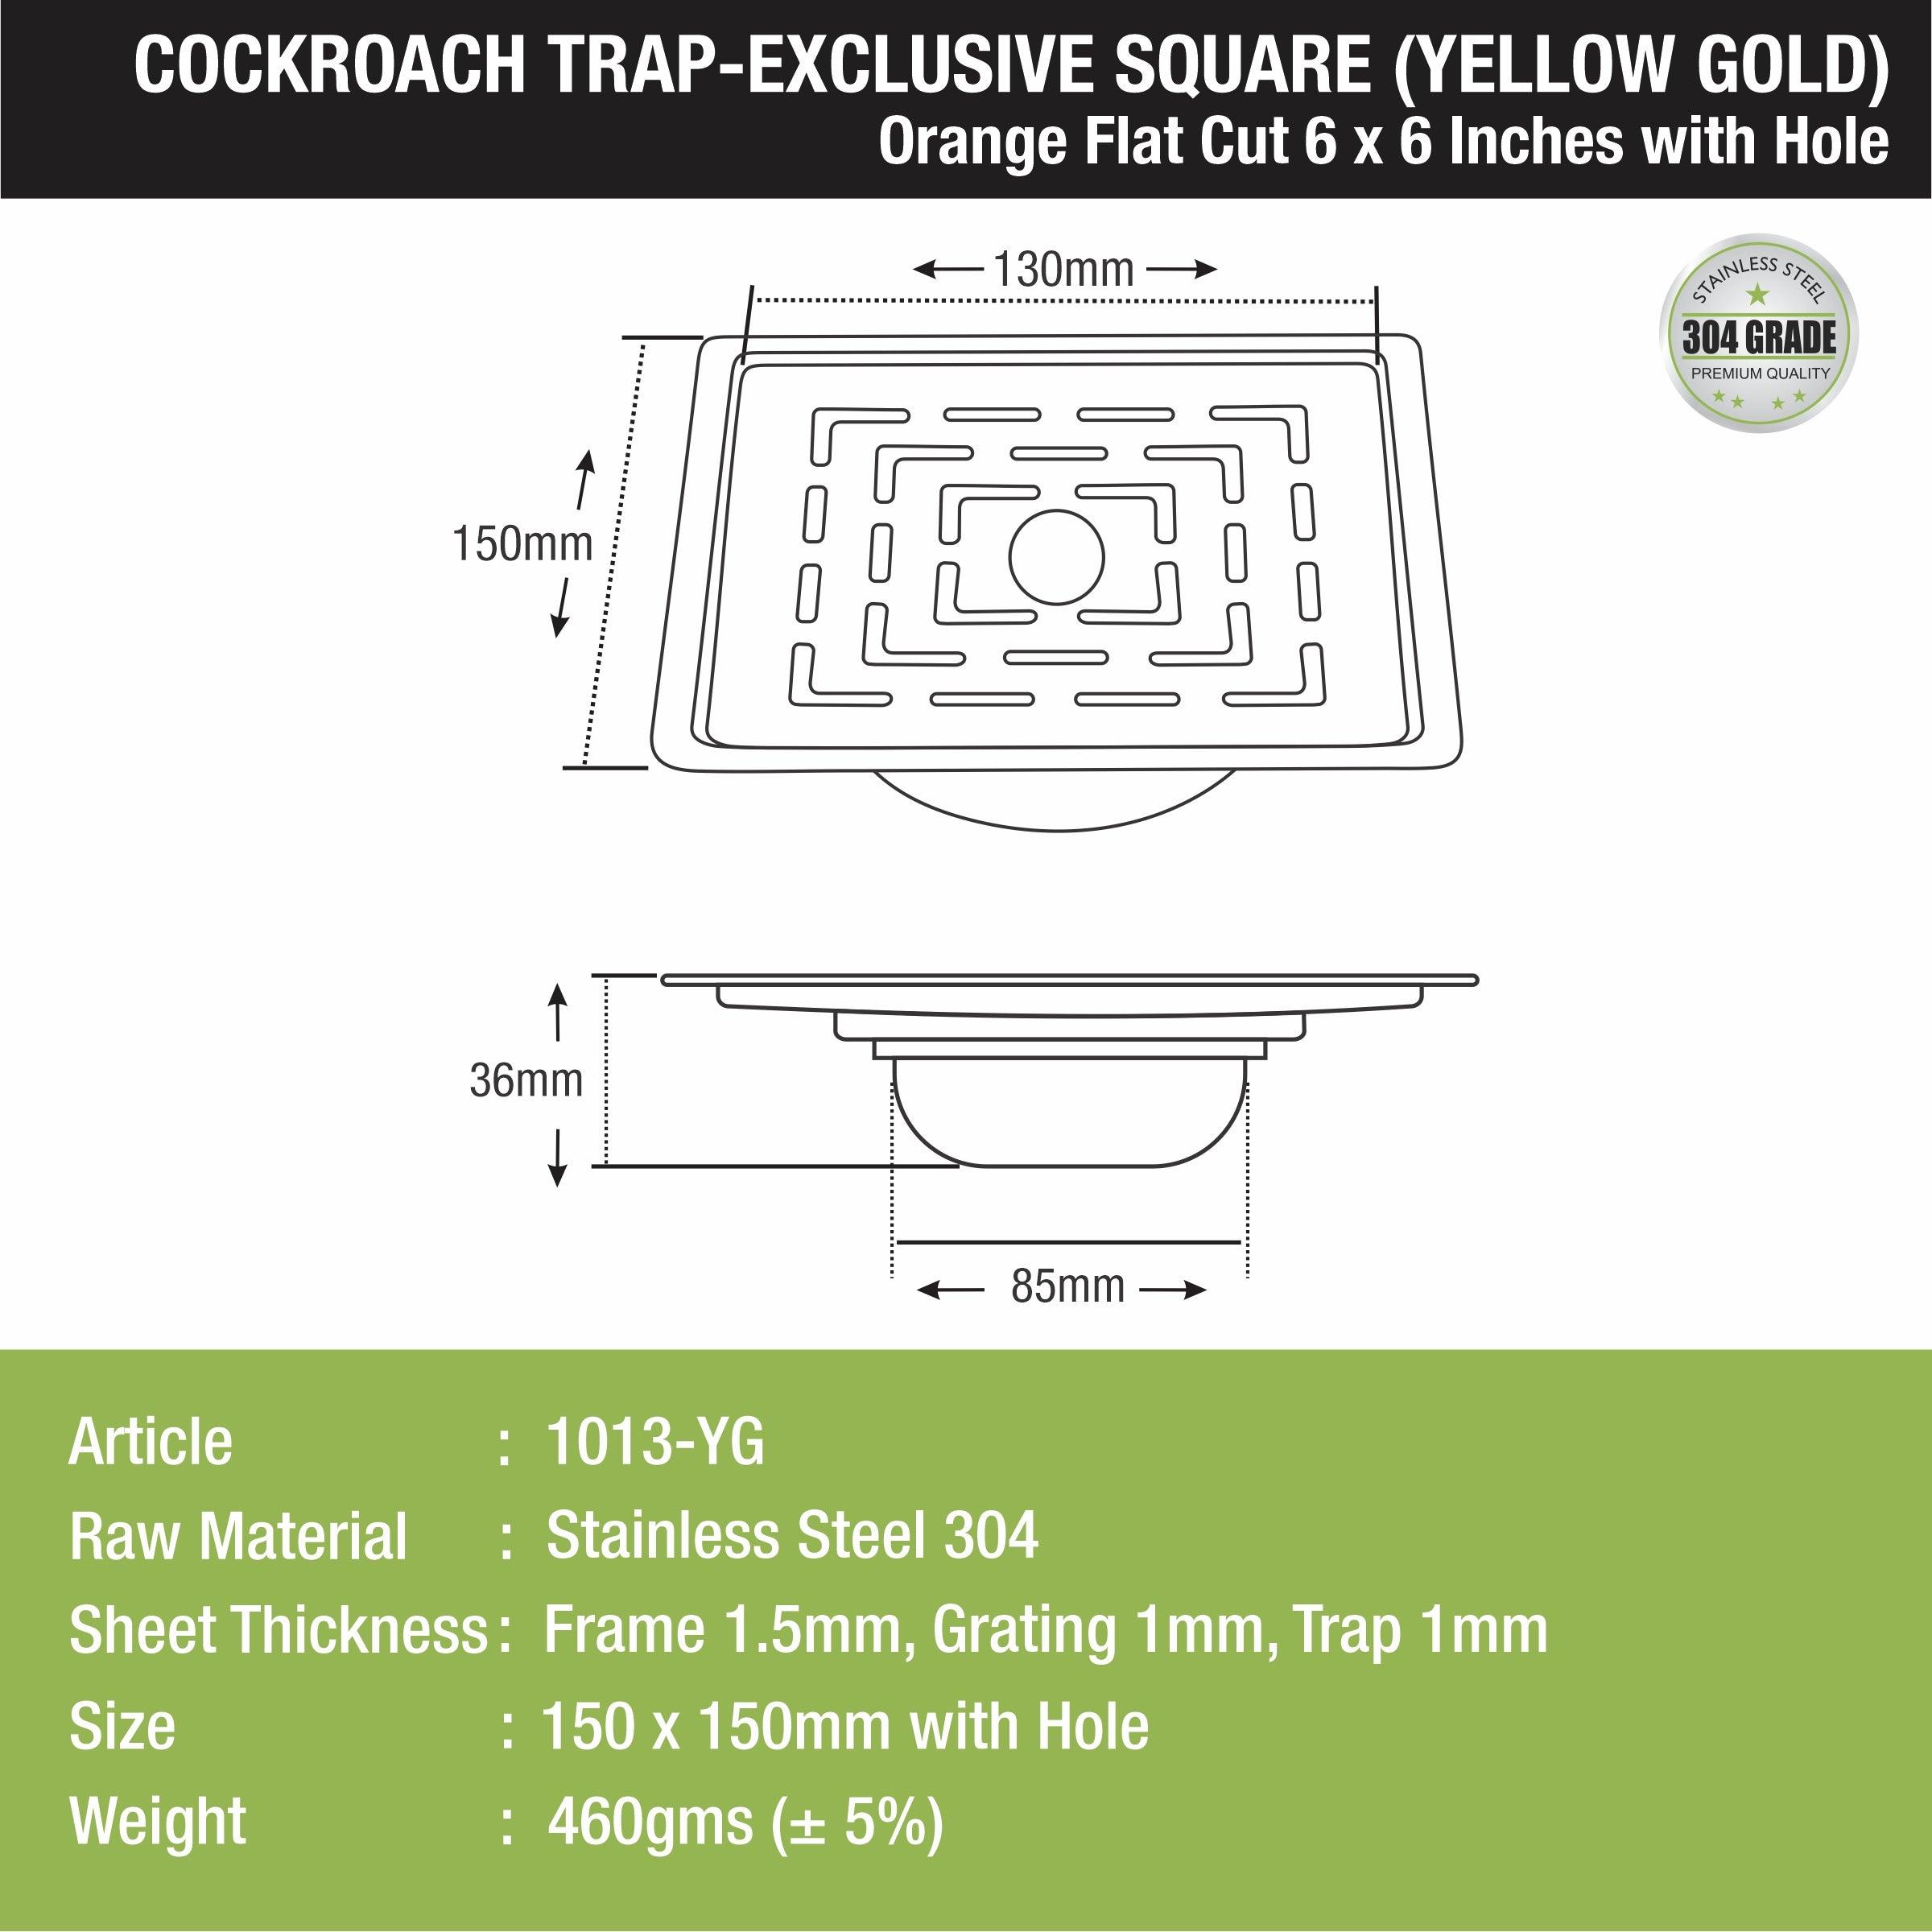 Orange Exclusive Square Flat Cut Floor Drain in Yellow Gold PVD Coating (6 x 6 Inches) with Hole & Cockroach Trap - LIPKA - Lipka Home